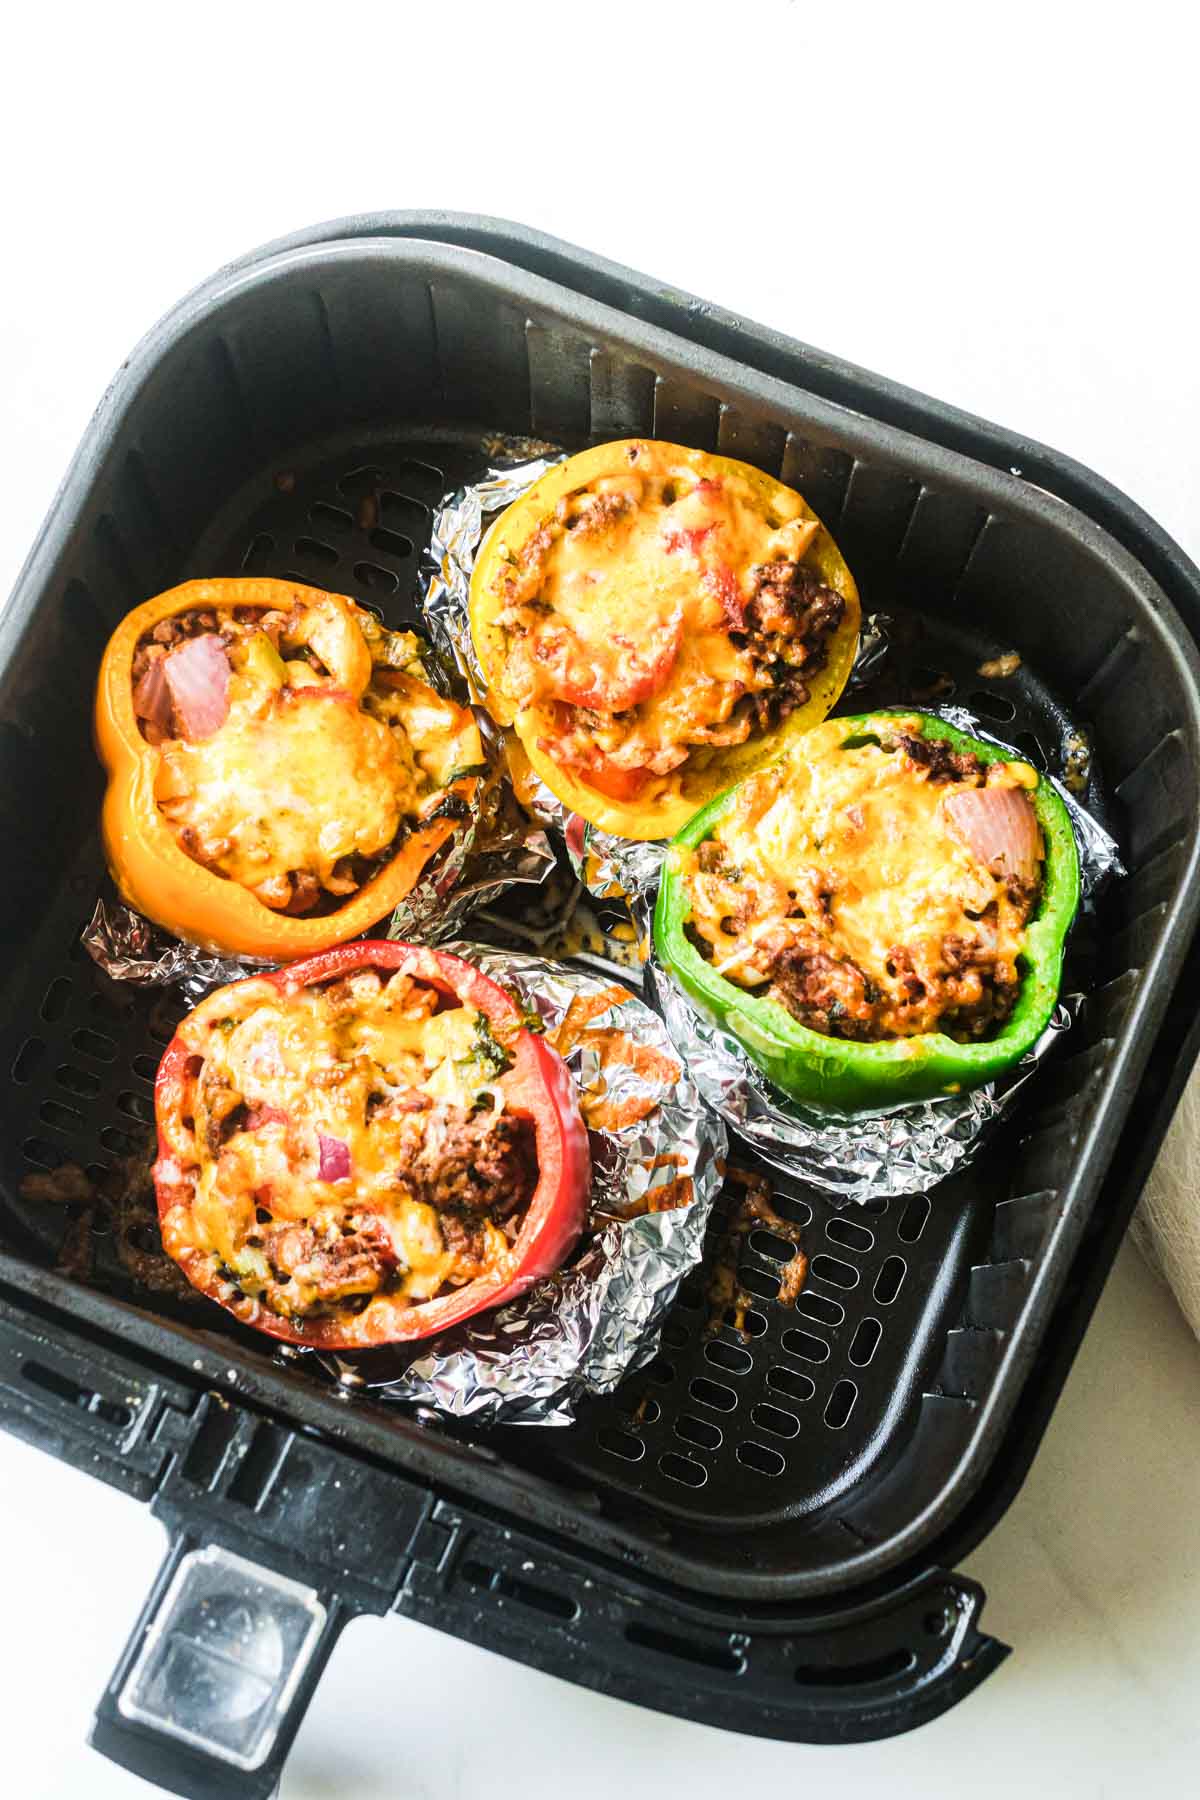 the cooked stuffed peppers in air fryer basket